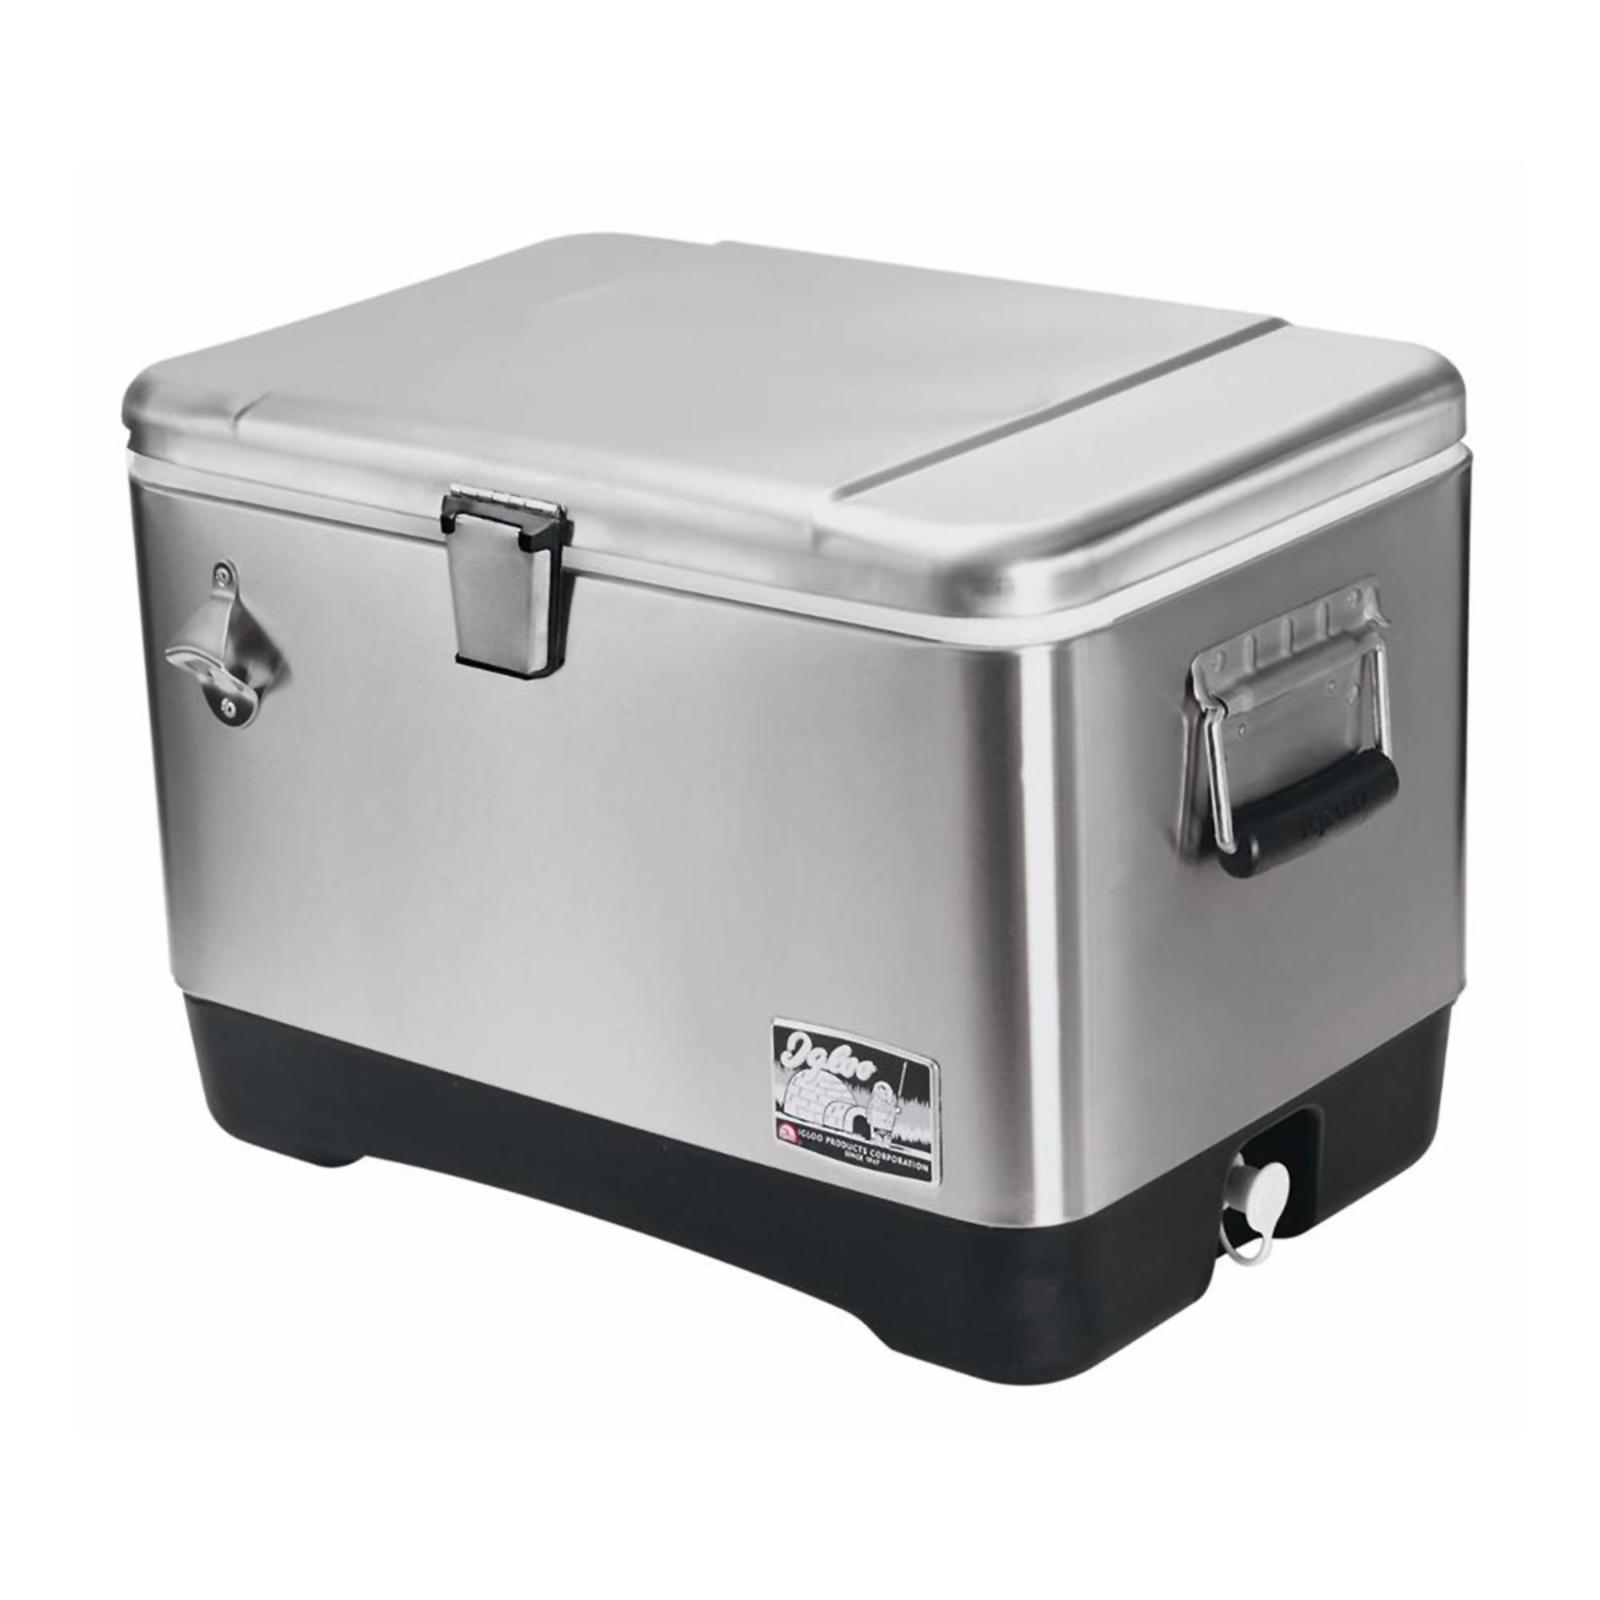 Igloo 54qt. Stainless-Steel Cooler with Swing-Up Handles and Drain Plug - Silver